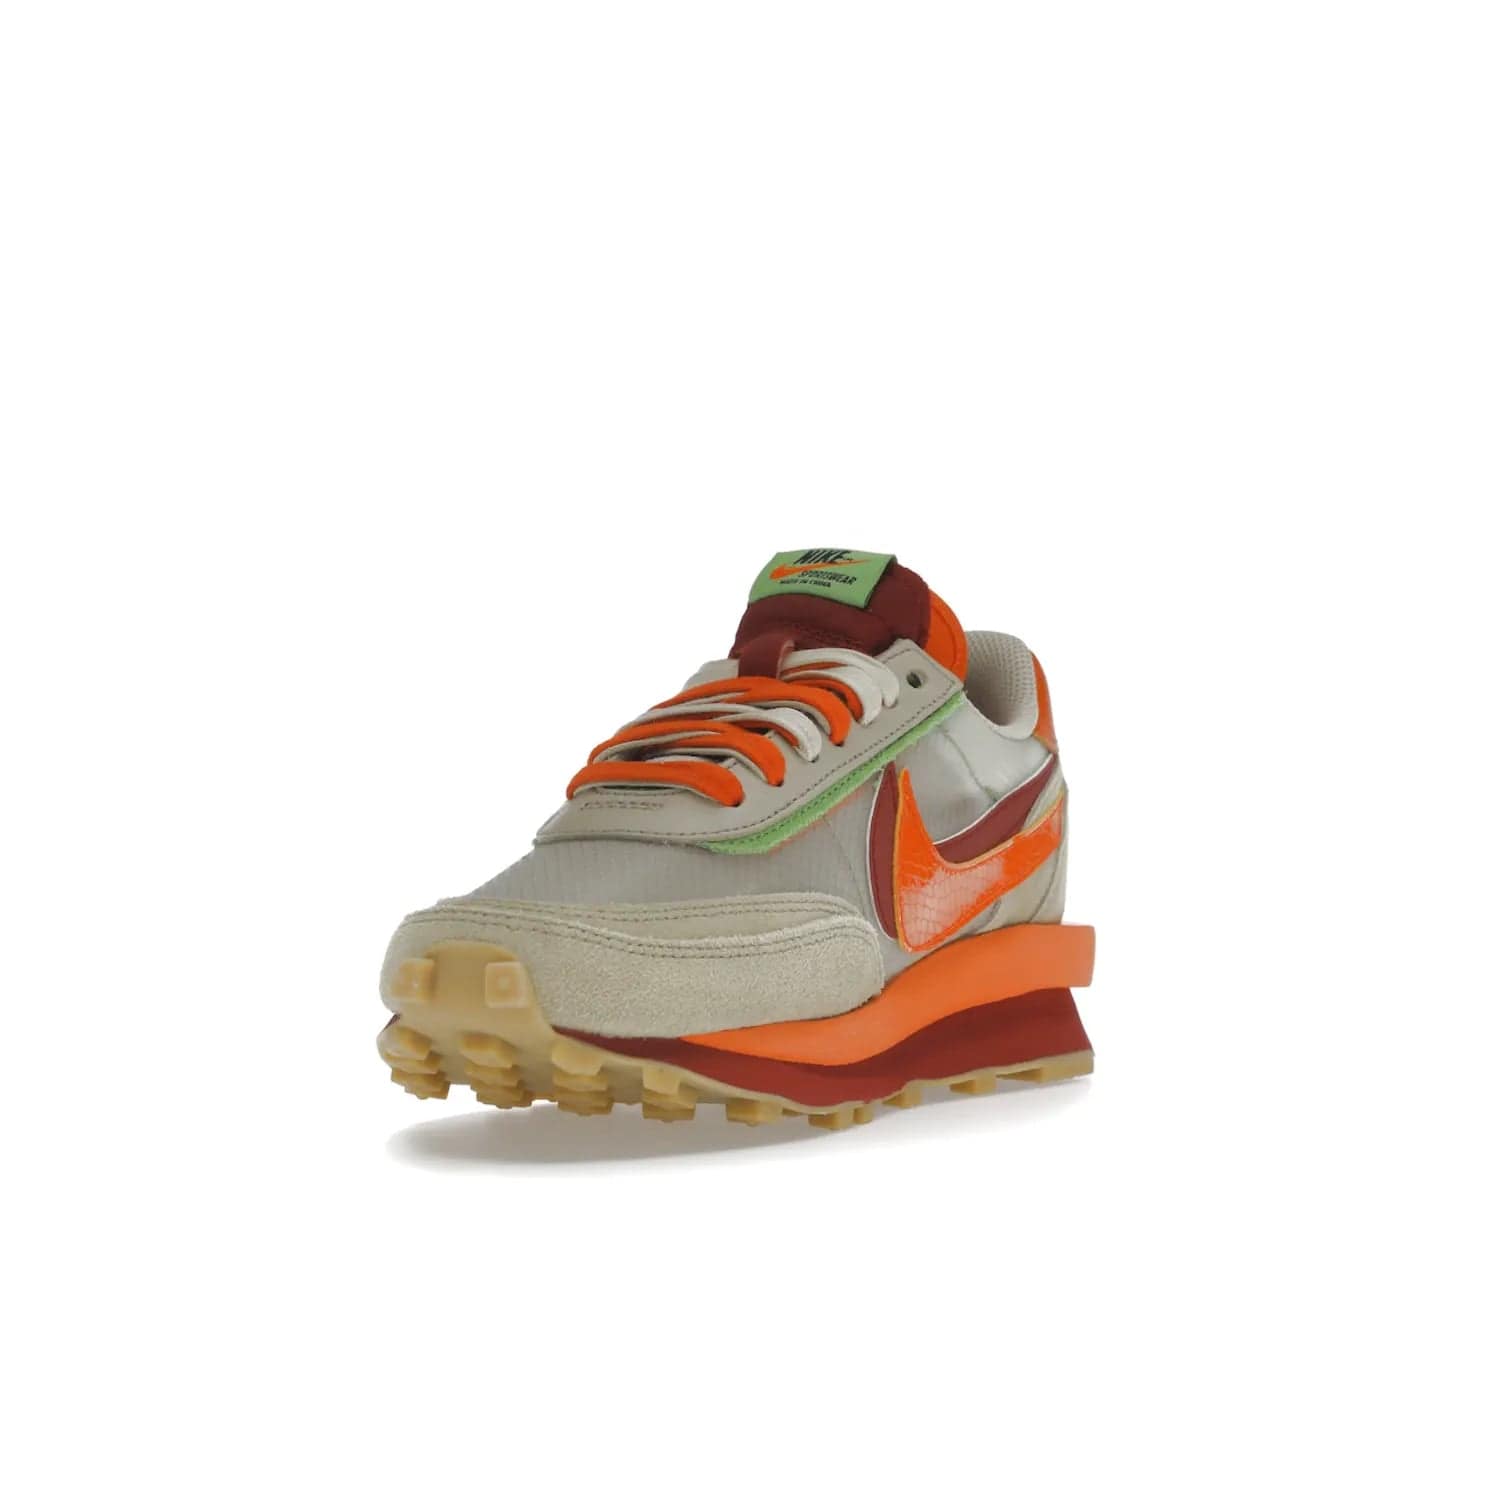 Nike LD Waffle sacai CLOT Kiss of Death Net Orange Blaze - Image 13 - Only at www.BallersClubKickz.com - A bold and stylish Nike LD Waffle sacai CLOT Kiss of Death Net Orange Blaze sneaker featuring a unique off-white, Deep Red & Orange Blaze Swooshes, two-toned stacked sole and doubled tongue. Available in September 2021. Make a statement.